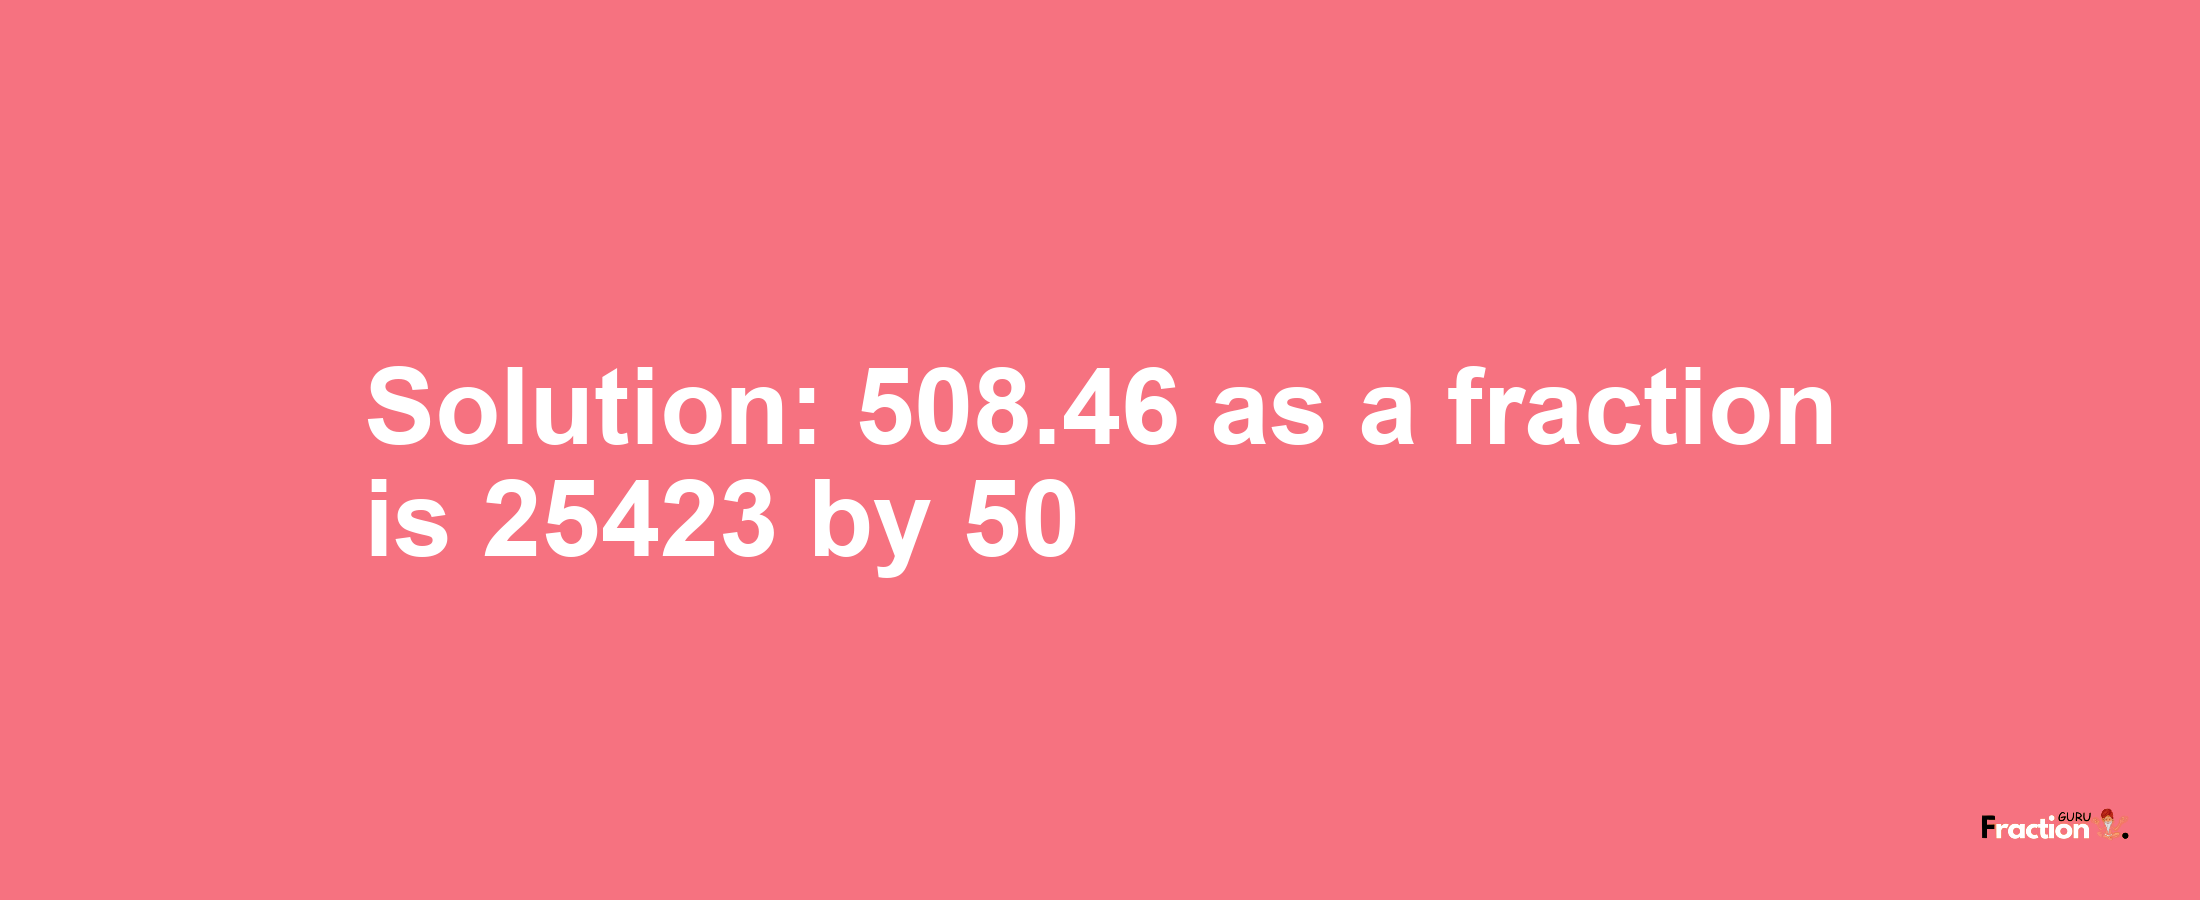 Solution:508.46 as a fraction is 25423/50